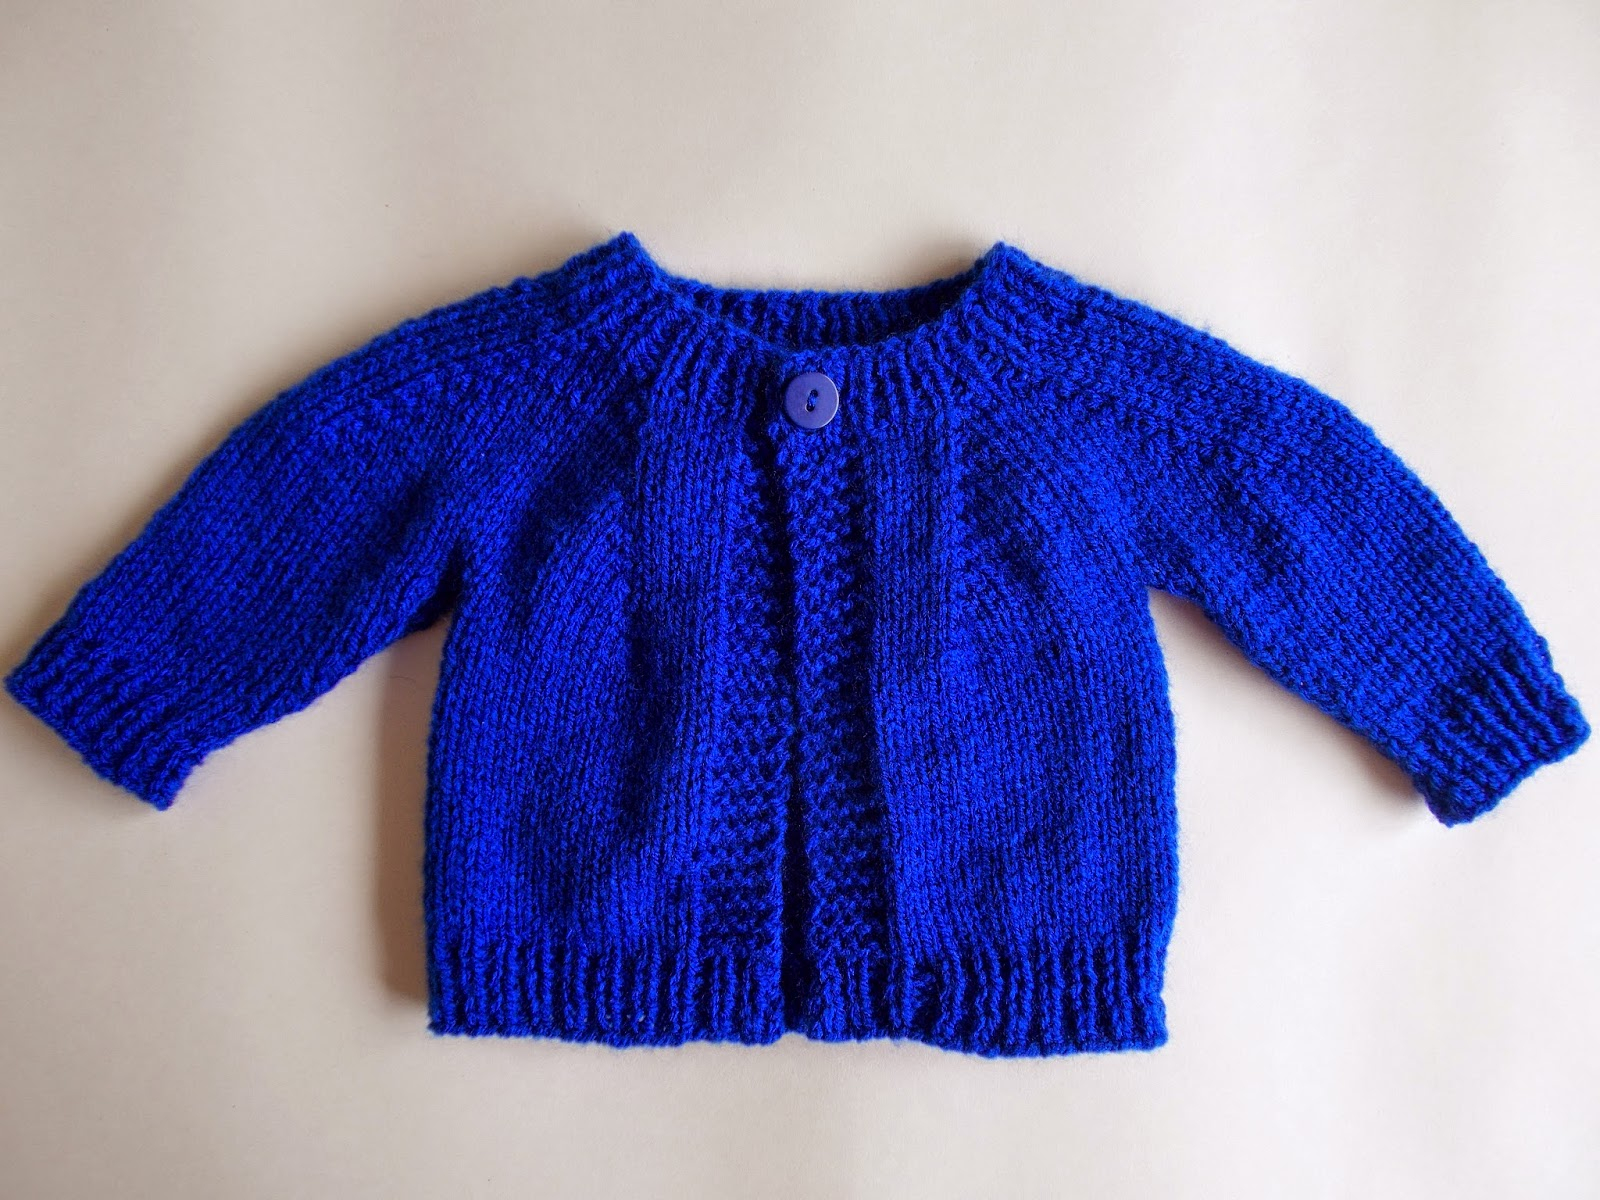 Free Knitting Patterns For Childrens Jackets Mariannas Lazy Daisy Days Boy Or Girl Top Down Ba Jacket